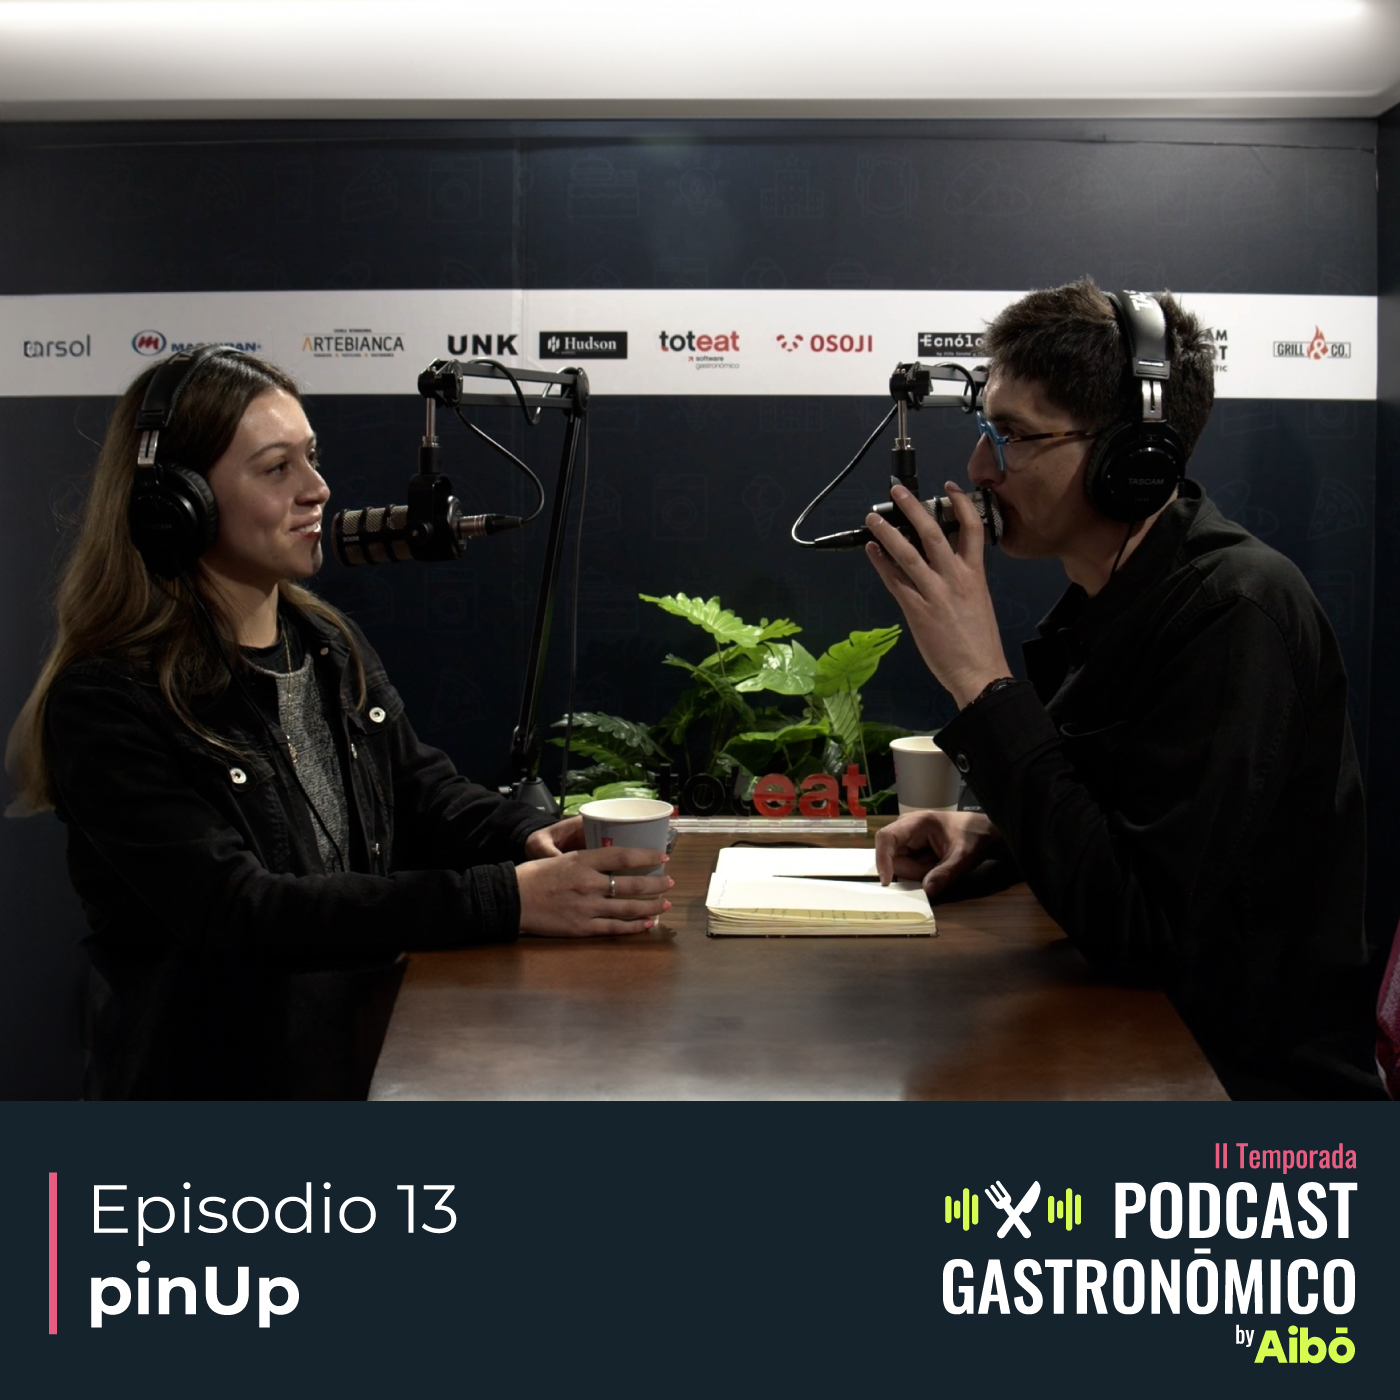 T02E13 - pinUp: Influencers y Gastronomía